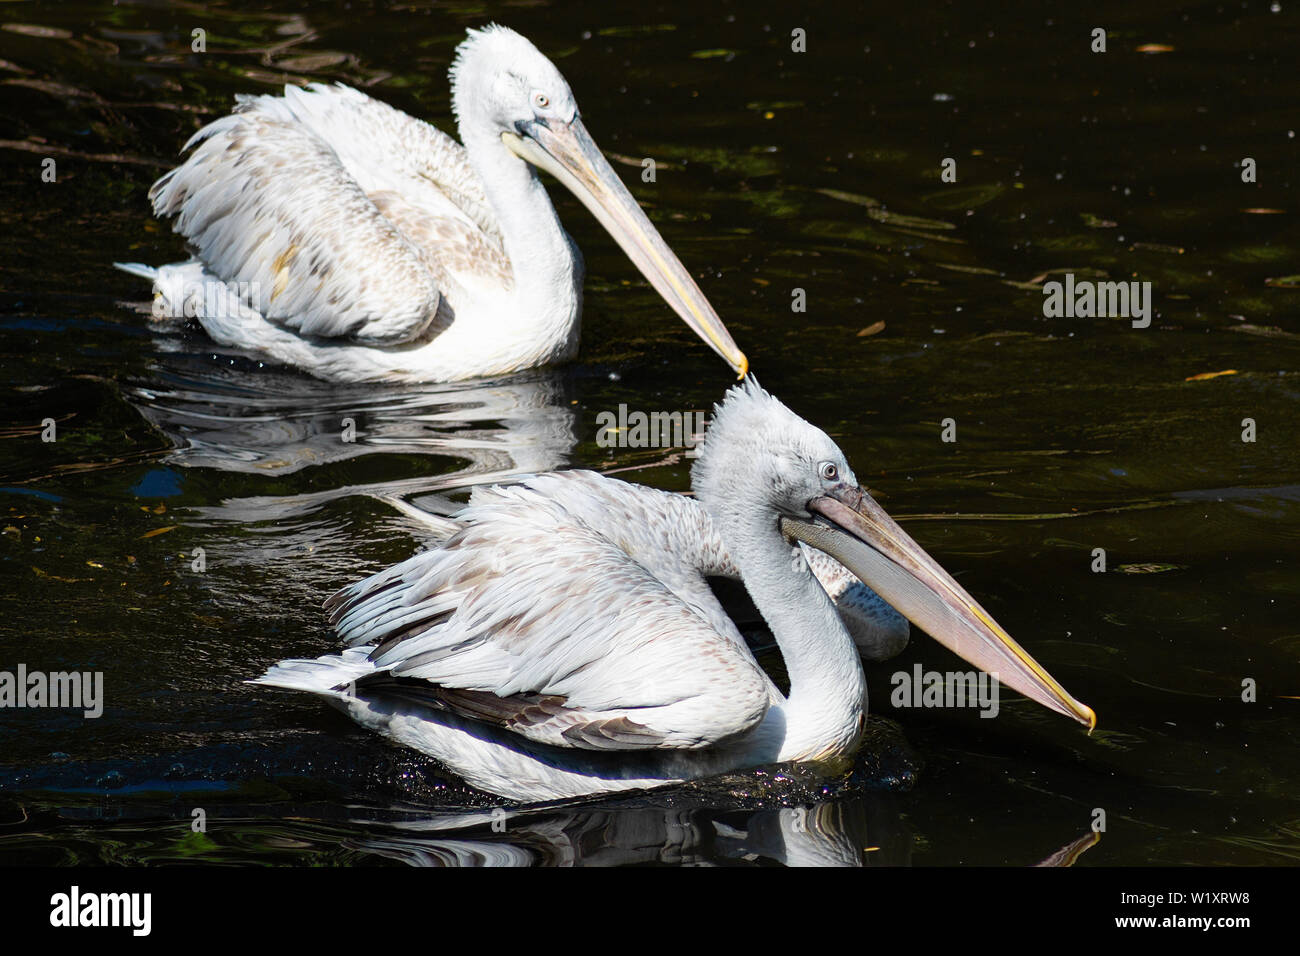 Dalmatian Pelican Pelecanus crispus with fluffy feathers on his head swims in the pond Stock Photo